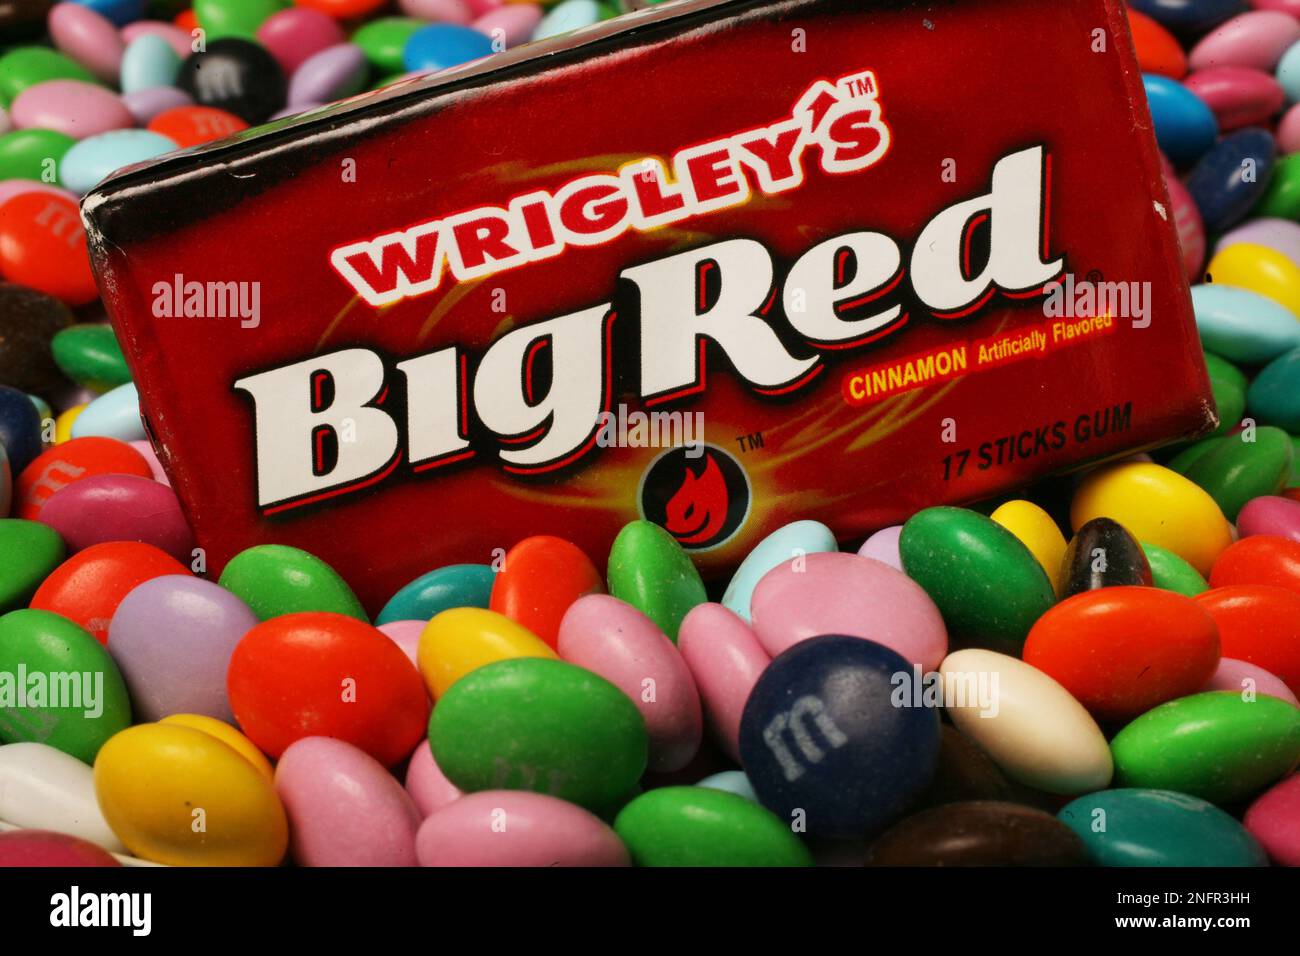 Wrigley's Big Red chewing gum is shown with M&M's on Monday, April 28, 2008 in New York. Mars Inc., maker of M&M's, and Warren Buffett's Berkshire Hathaway Inc., were close to a deal to acquire the Wm. Wrigley Jr. Company for more than $22 billion, a deal that could transform the confectionary industry. (AP Photo/Mark Lennihan) Foto Stock